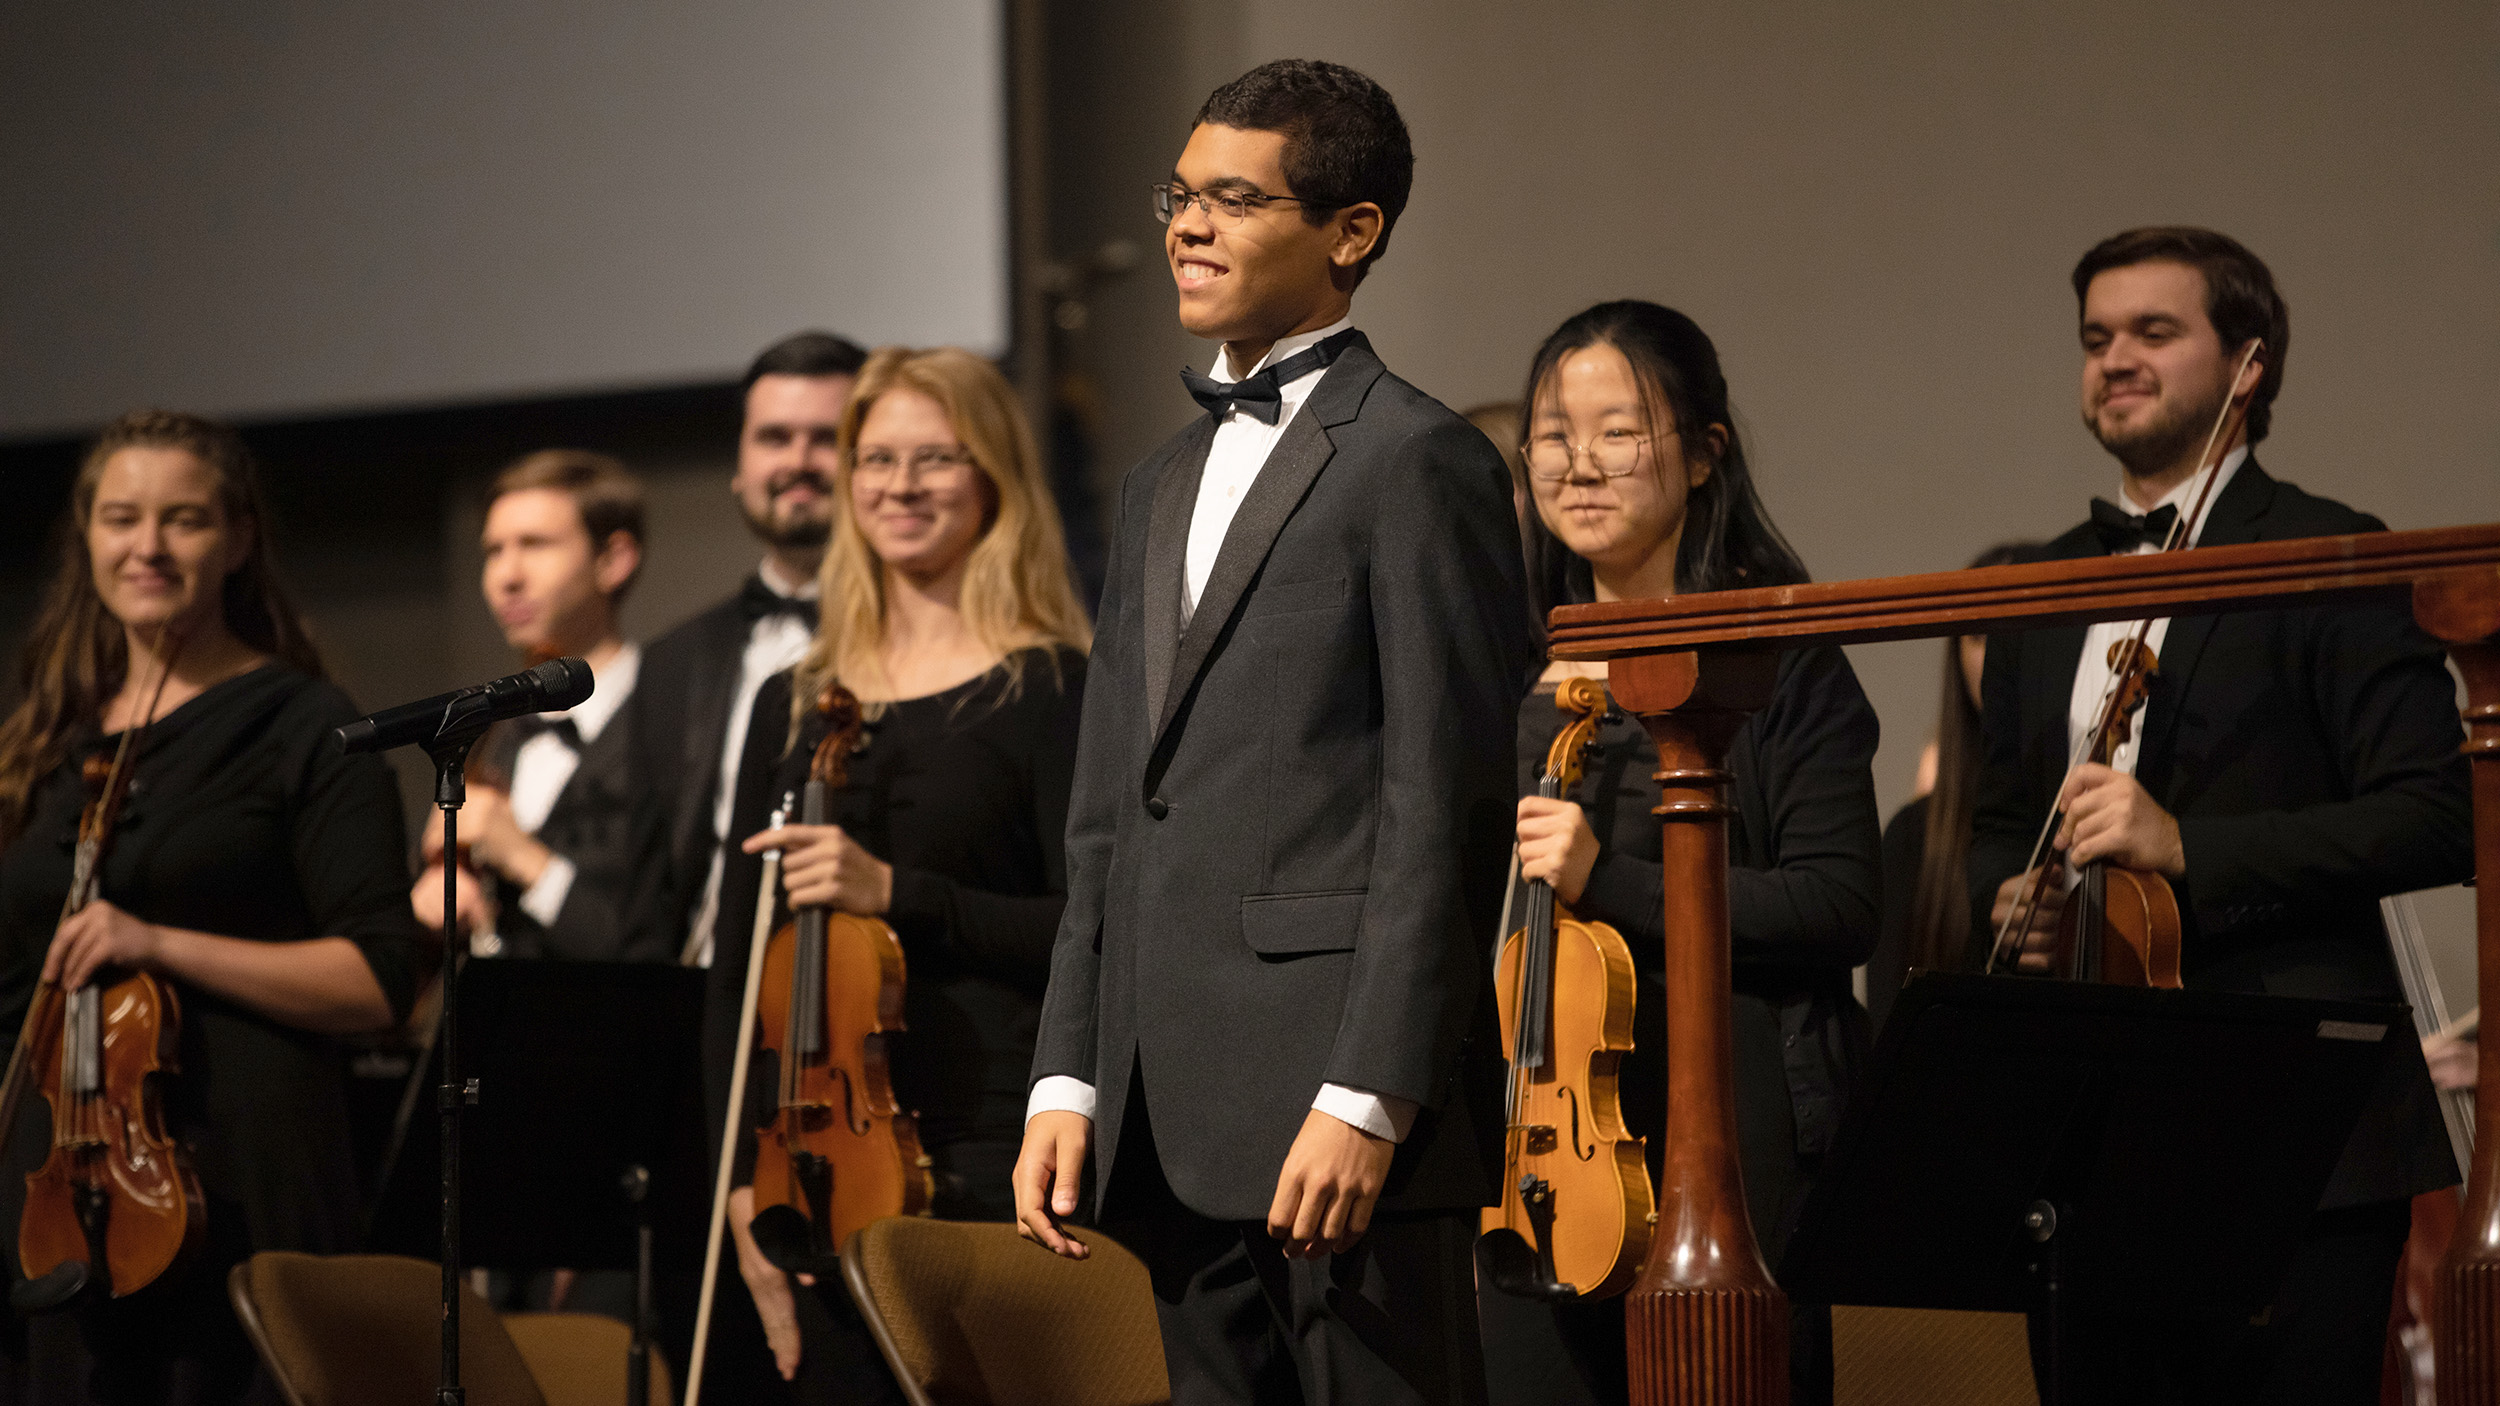 Student Composer Matthew Kimbley smiles on stage after conducting an original composition